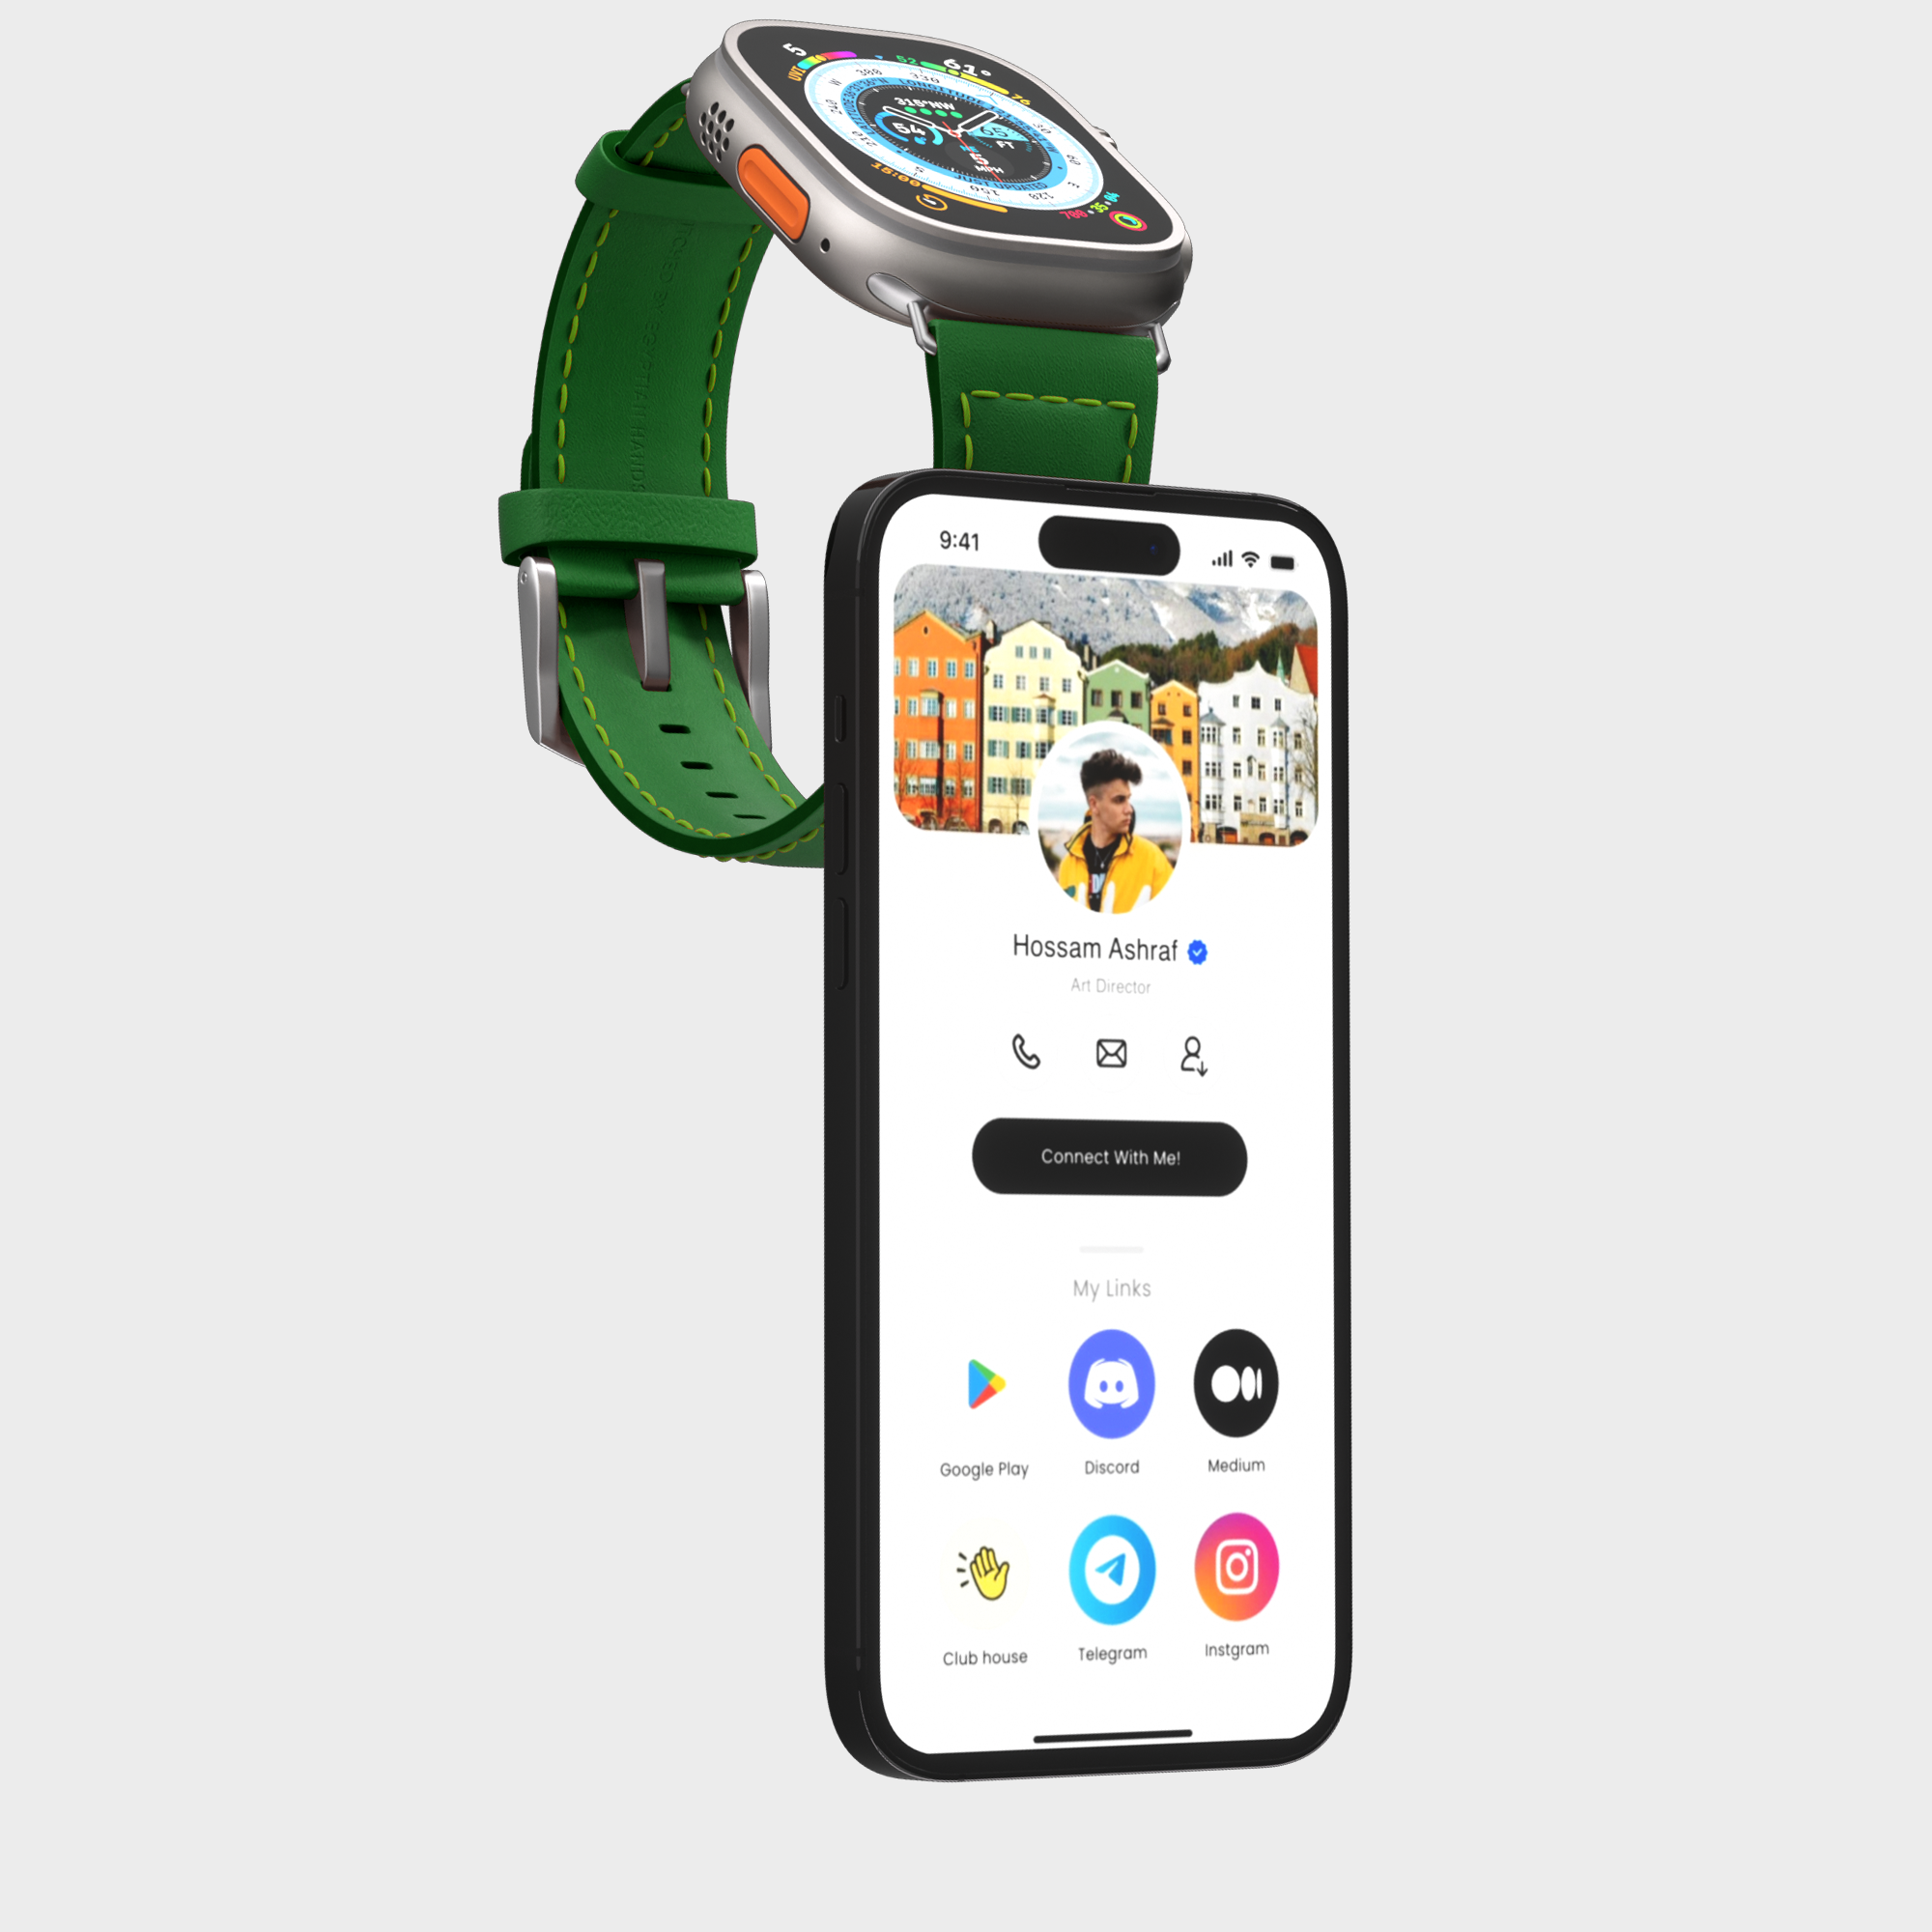 Smartwatch with green strap above smartphone displaying social media profile and apps on screen.